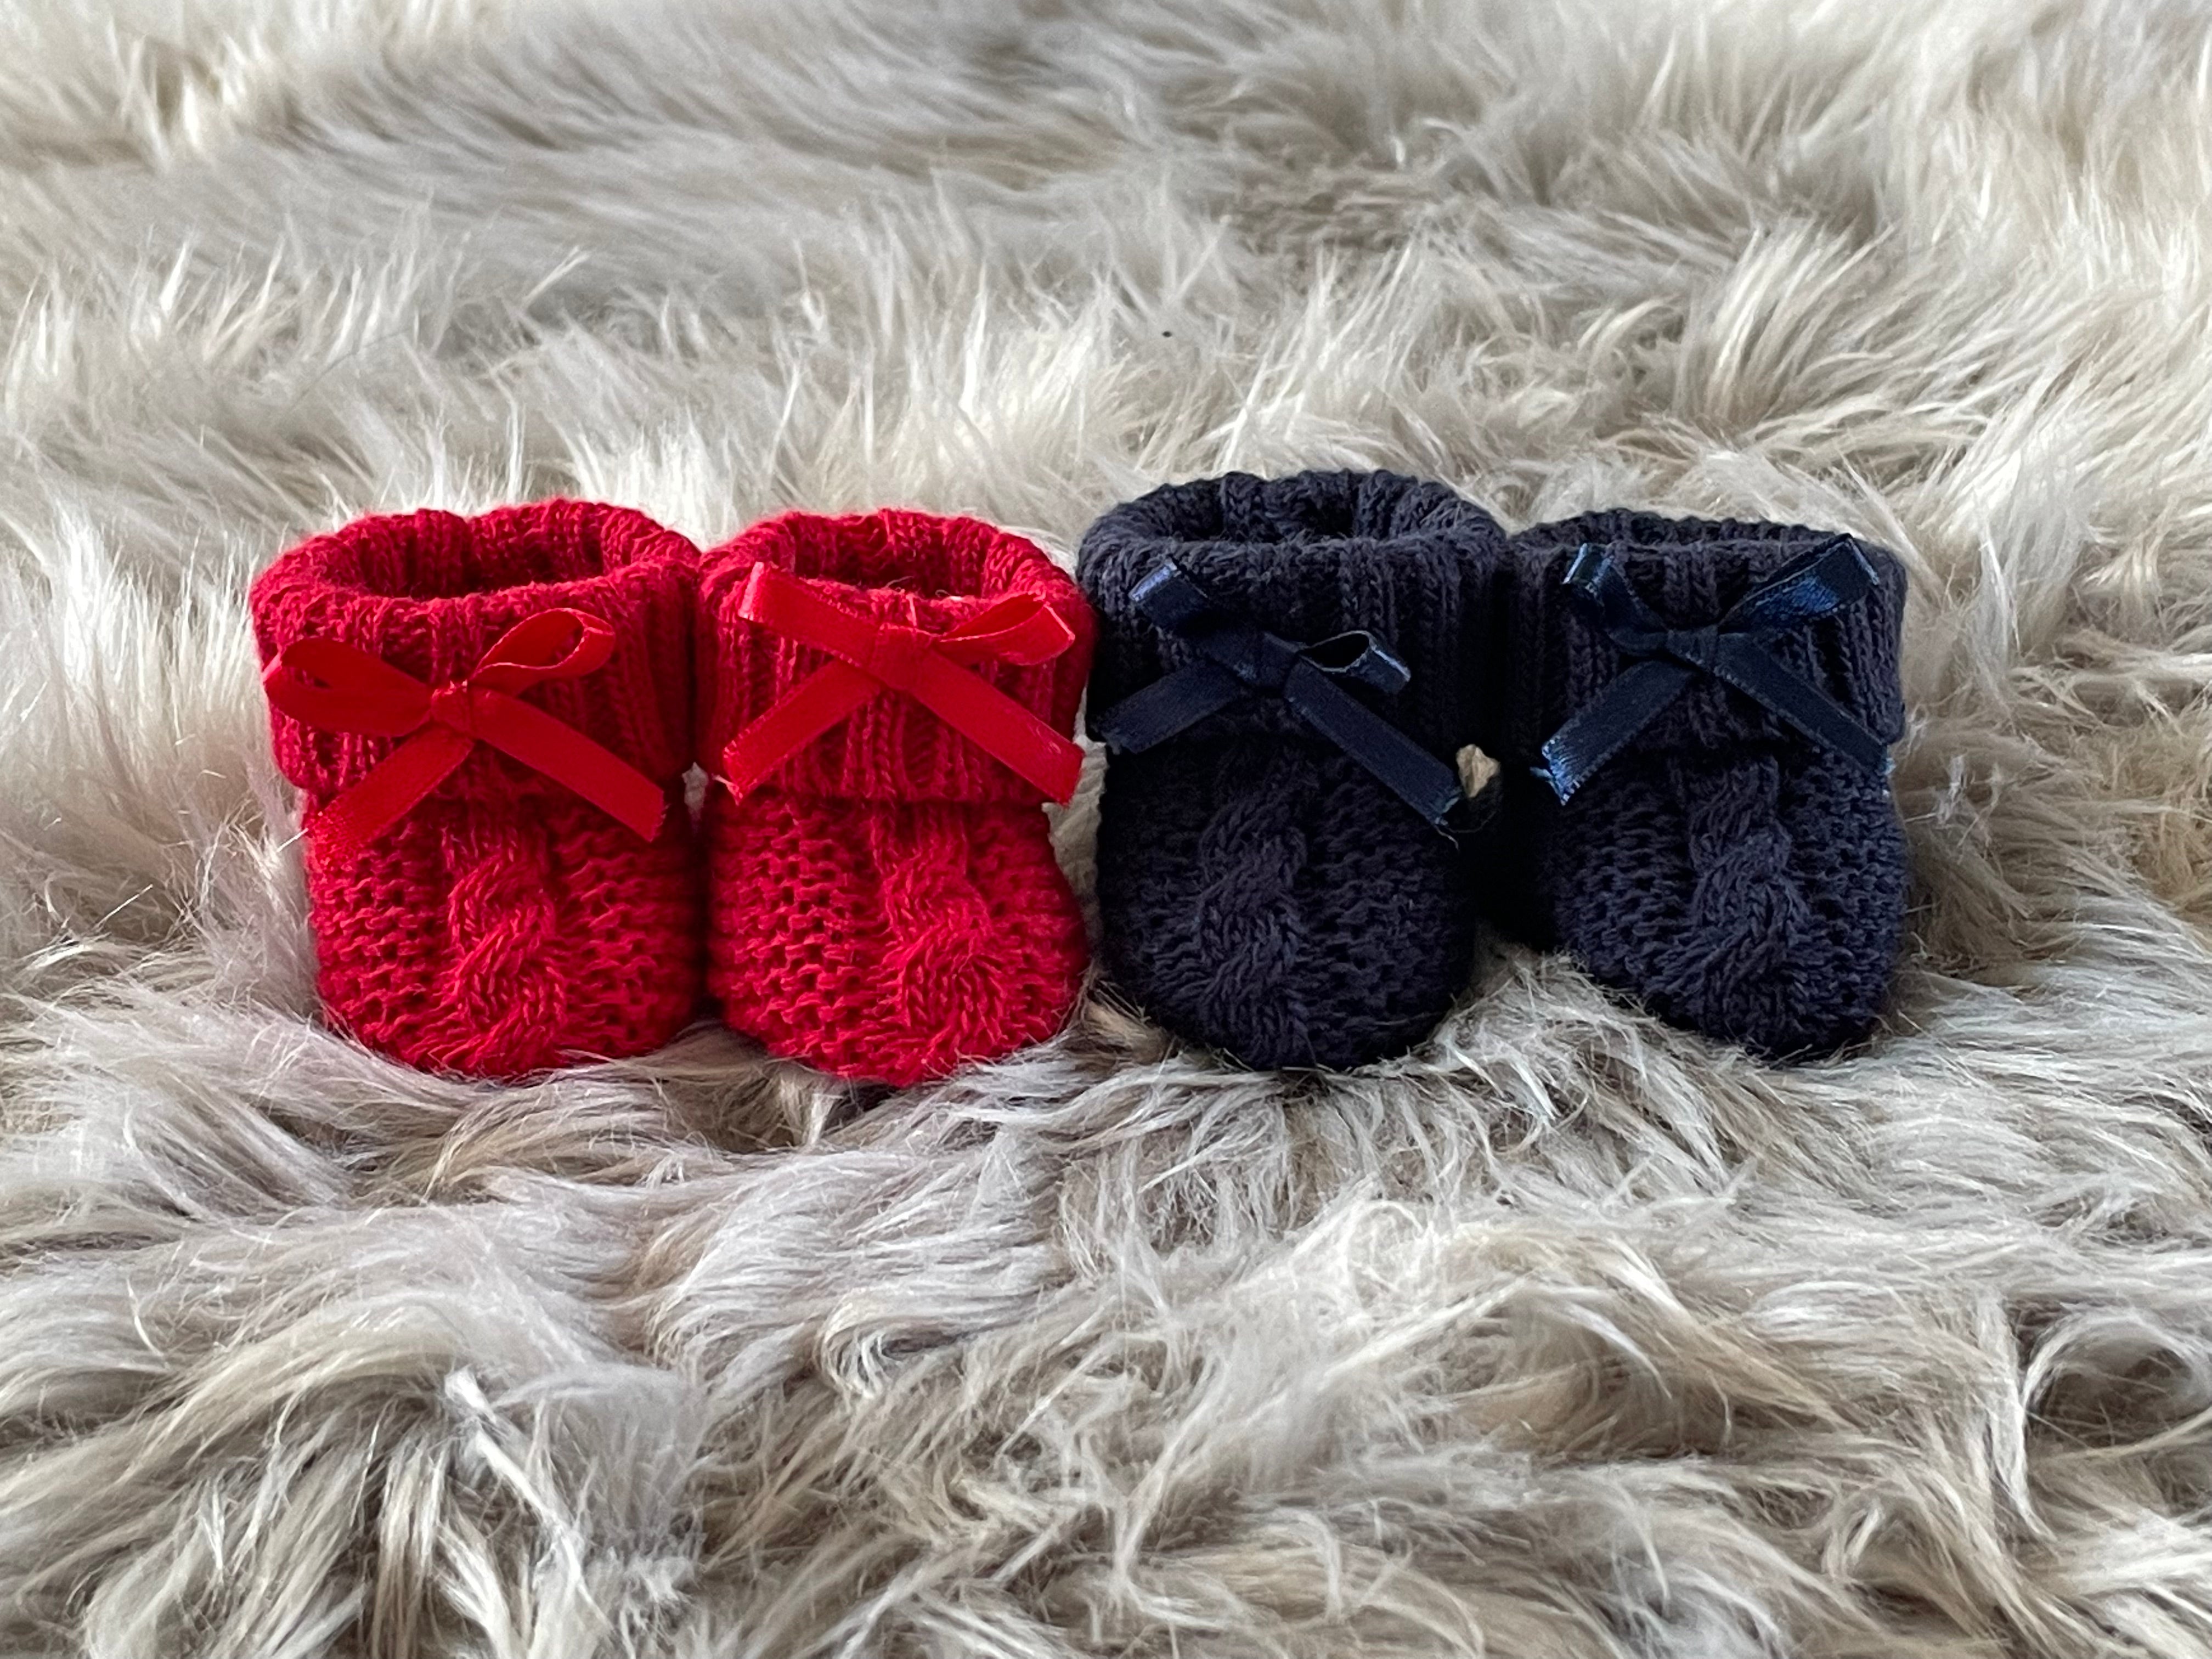 Wine Red Knitted Newborn Baby Booties With Bow